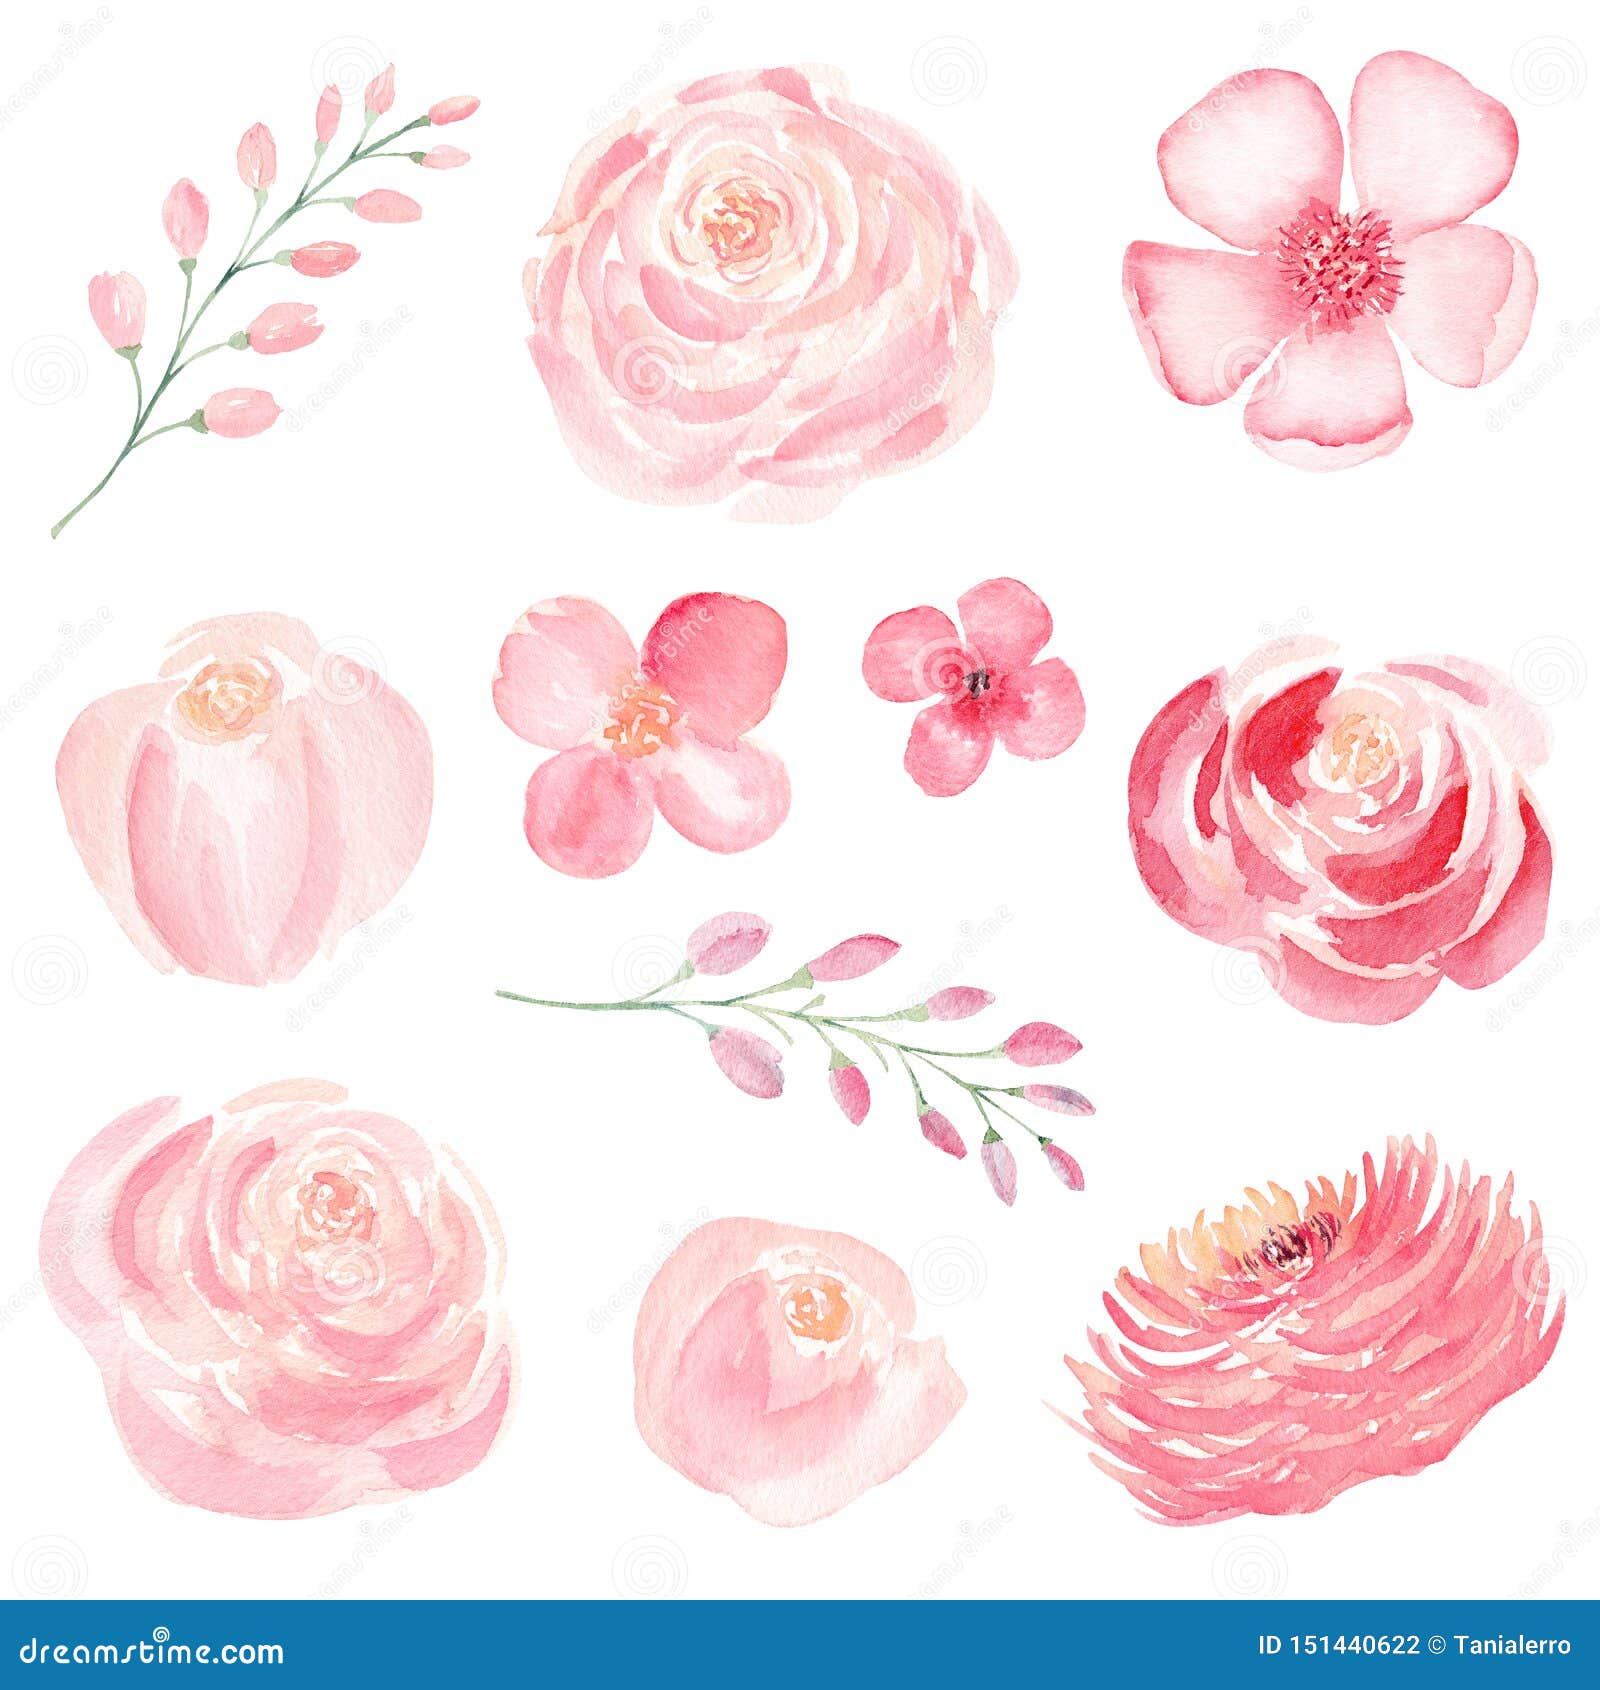 Pink Flowers Hand Drawn Watercolor Raster Illustrations Set Stock ...